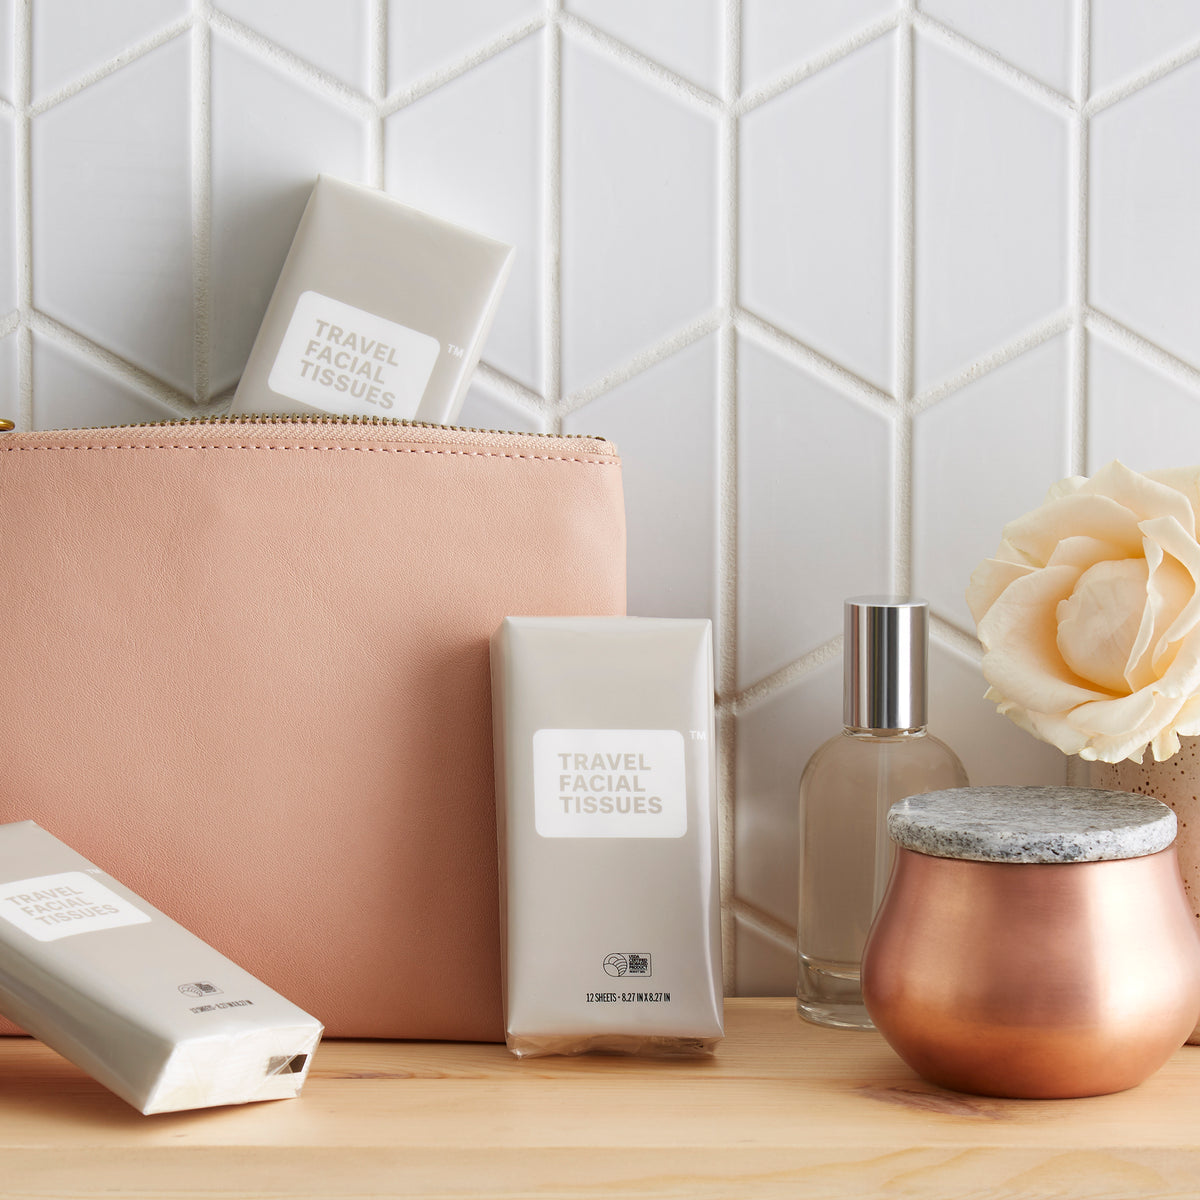 Lifestyle, travel facial tissue packs lean against a purse on a bathroom shelf next to a perfume bottle and a single rose in a cup-sized vase.in preparation for an evening out.